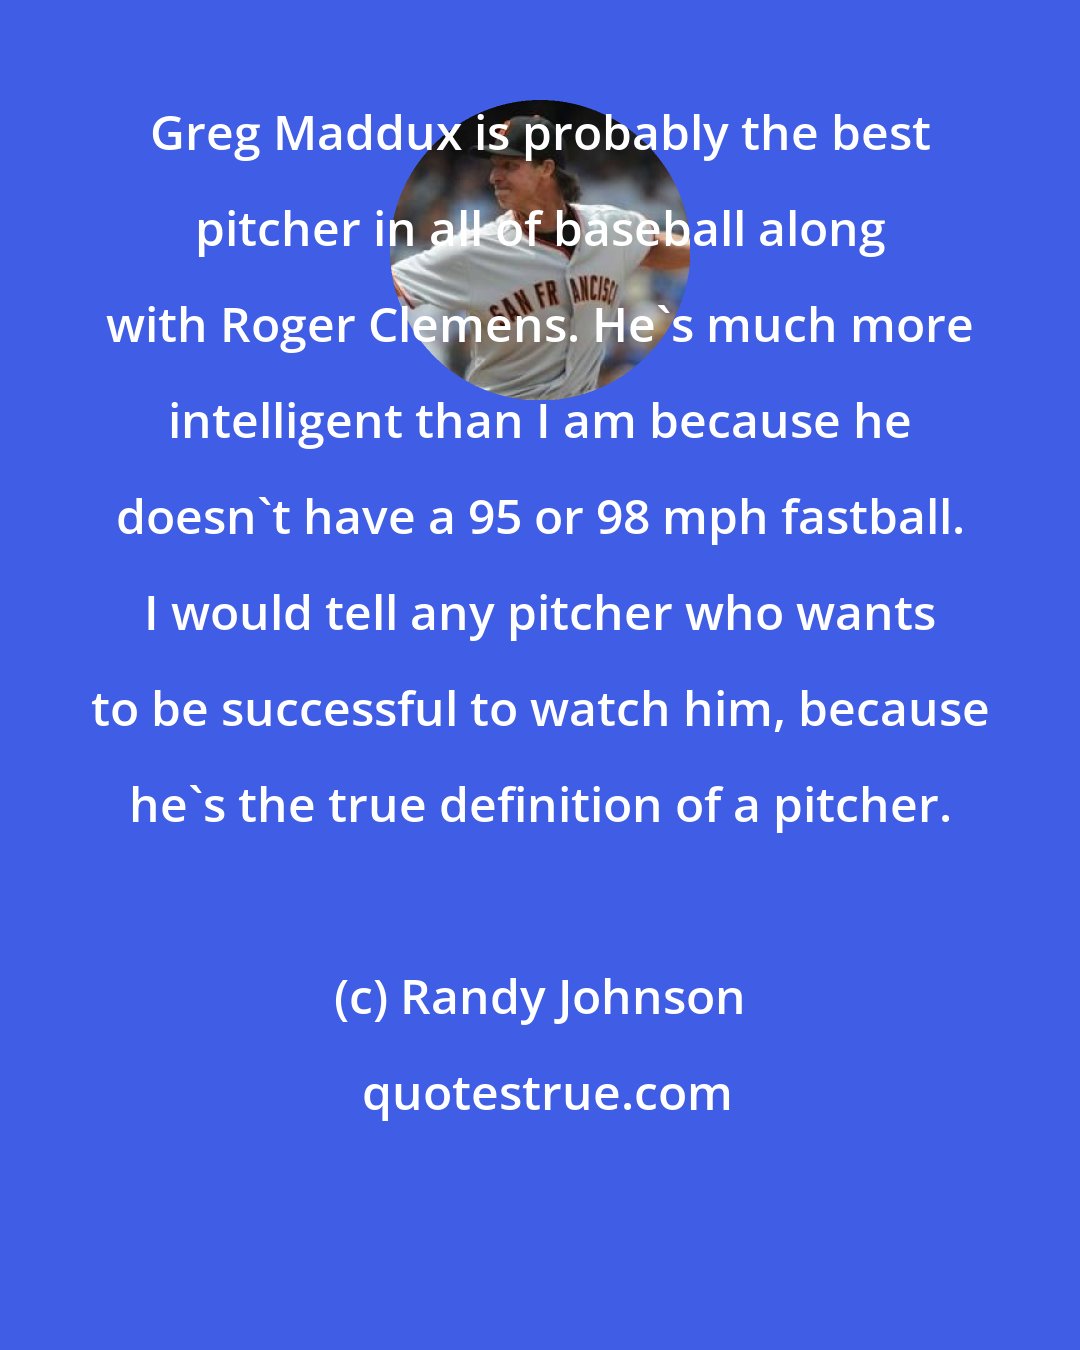 Randy Johnson: Greg Maddux is probably the best pitcher in all of baseball along with Roger Clemens. He's much more intelligent than I am because he doesn't have a 95 or 98 mph fastball. I would tell any pitcher who wants to be successful to watch him, because he's the true definition of a pitcher.